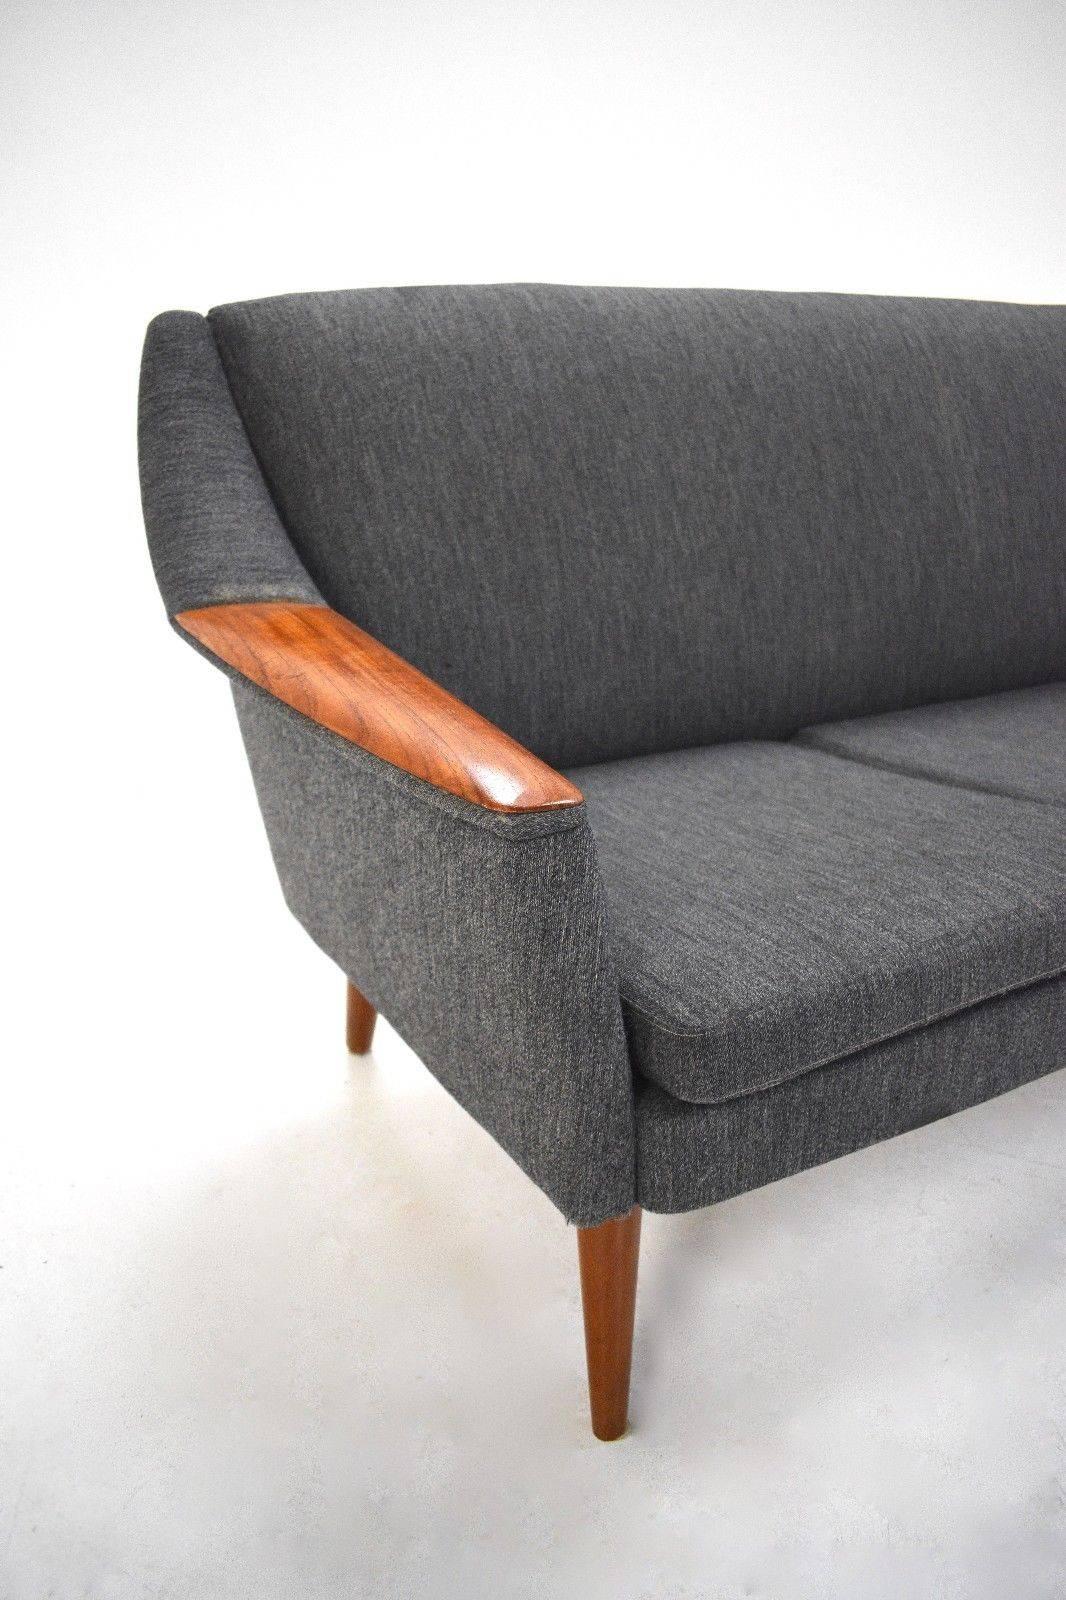 Mid-Century Modern Norwegian Charcoal Grey Wool and Teak Four-Seat Sofa Midcentury, 1960s For Sale